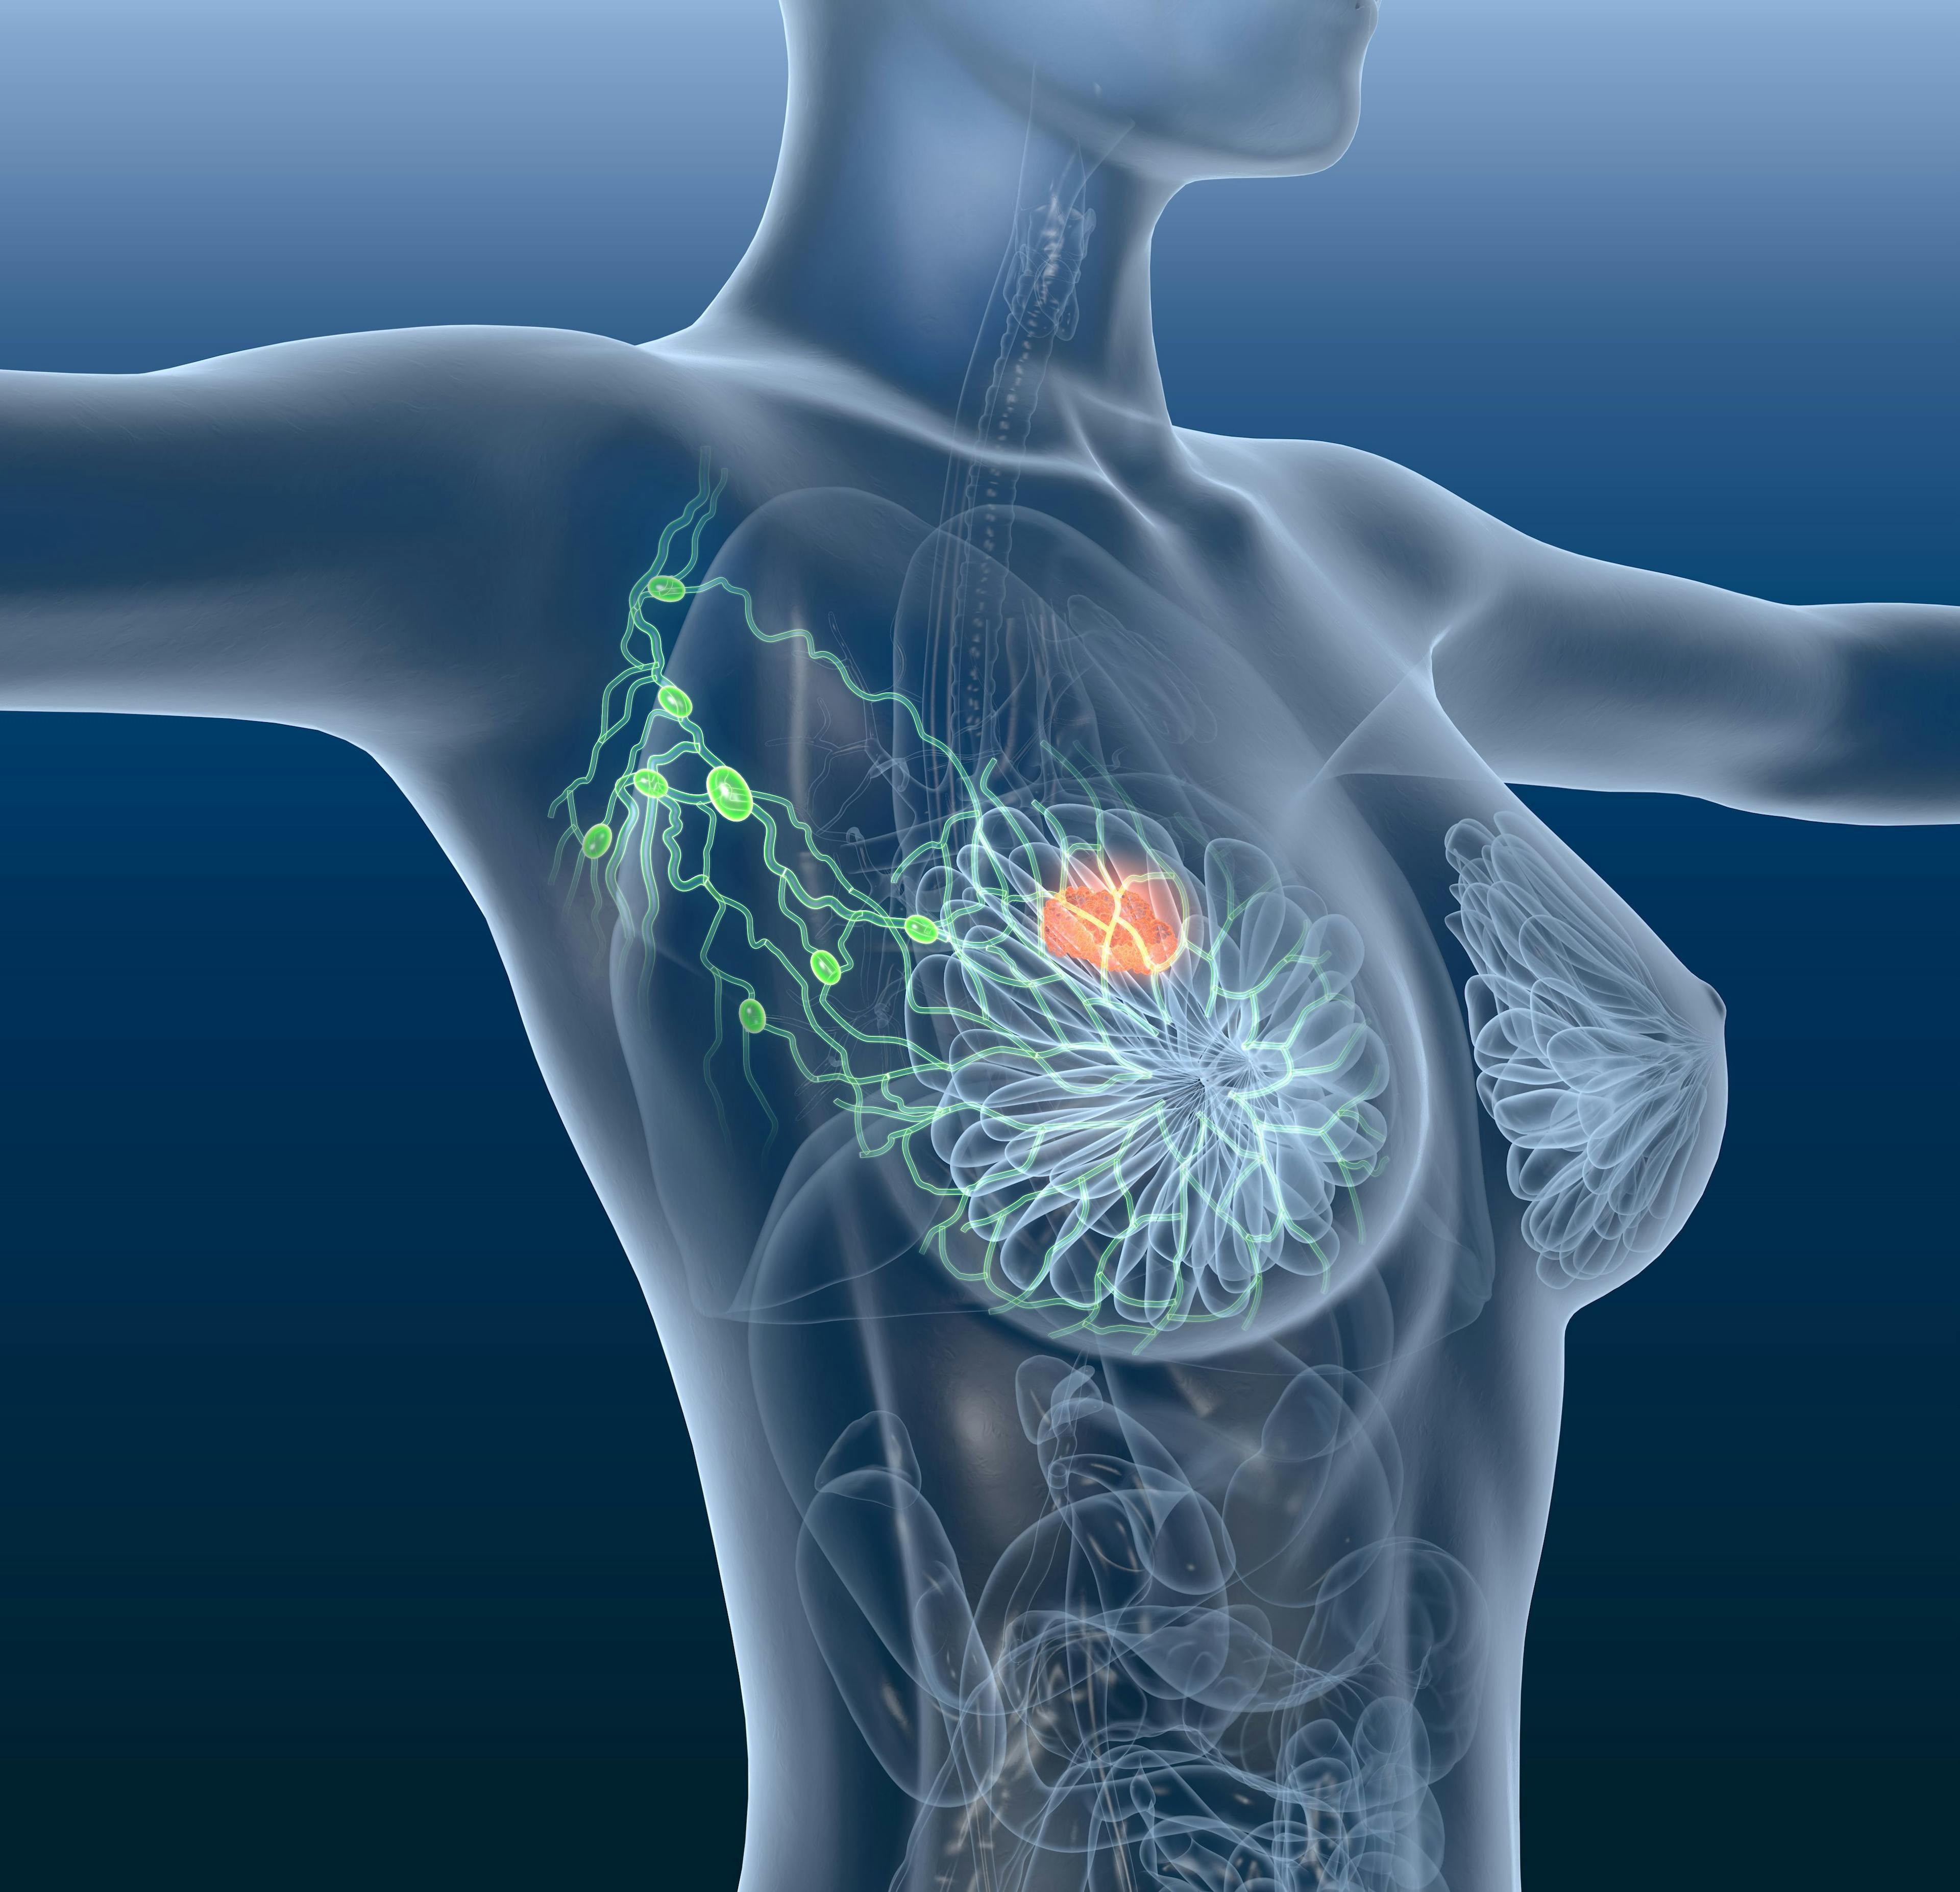 Combining ribociclib with nonsteroidal aromatase inhibitor treatment also produces relapse-free survival and distant disease-free survival benefits in patients with HR-positive, HER2-negative early-stage breast cancer.